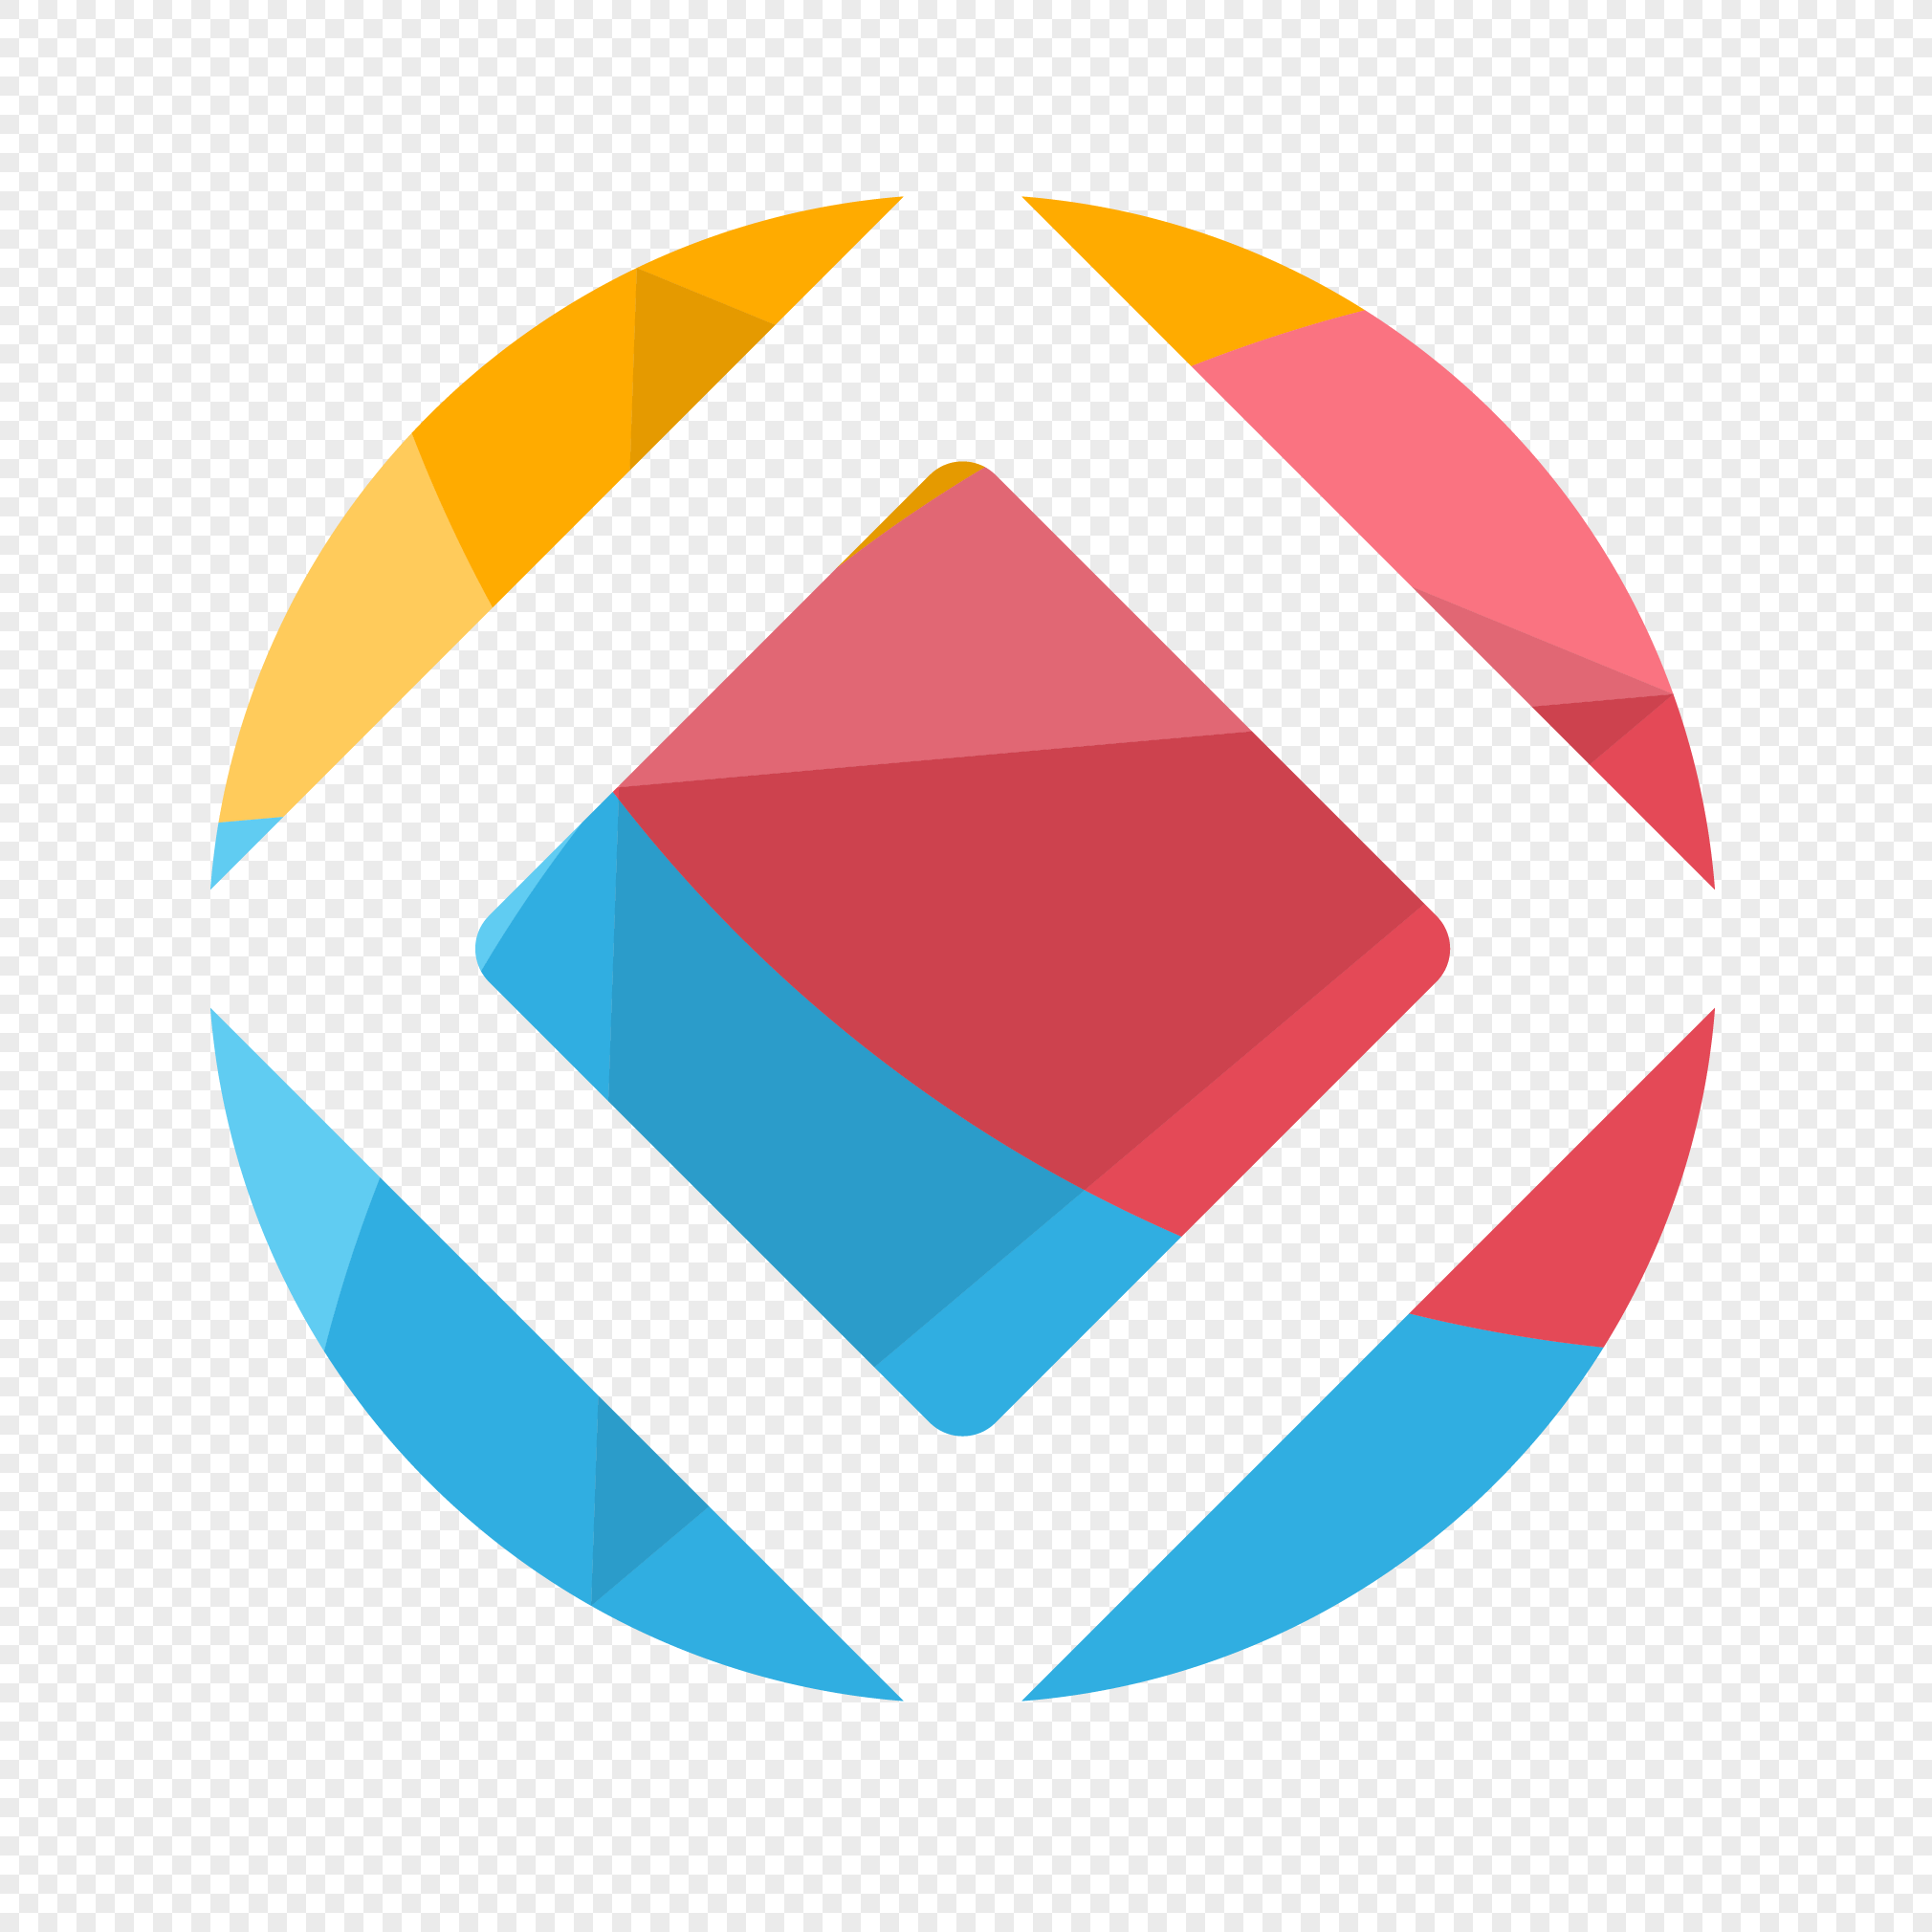 Round Square Logo - Round square geometry logo png image_picture free download ...